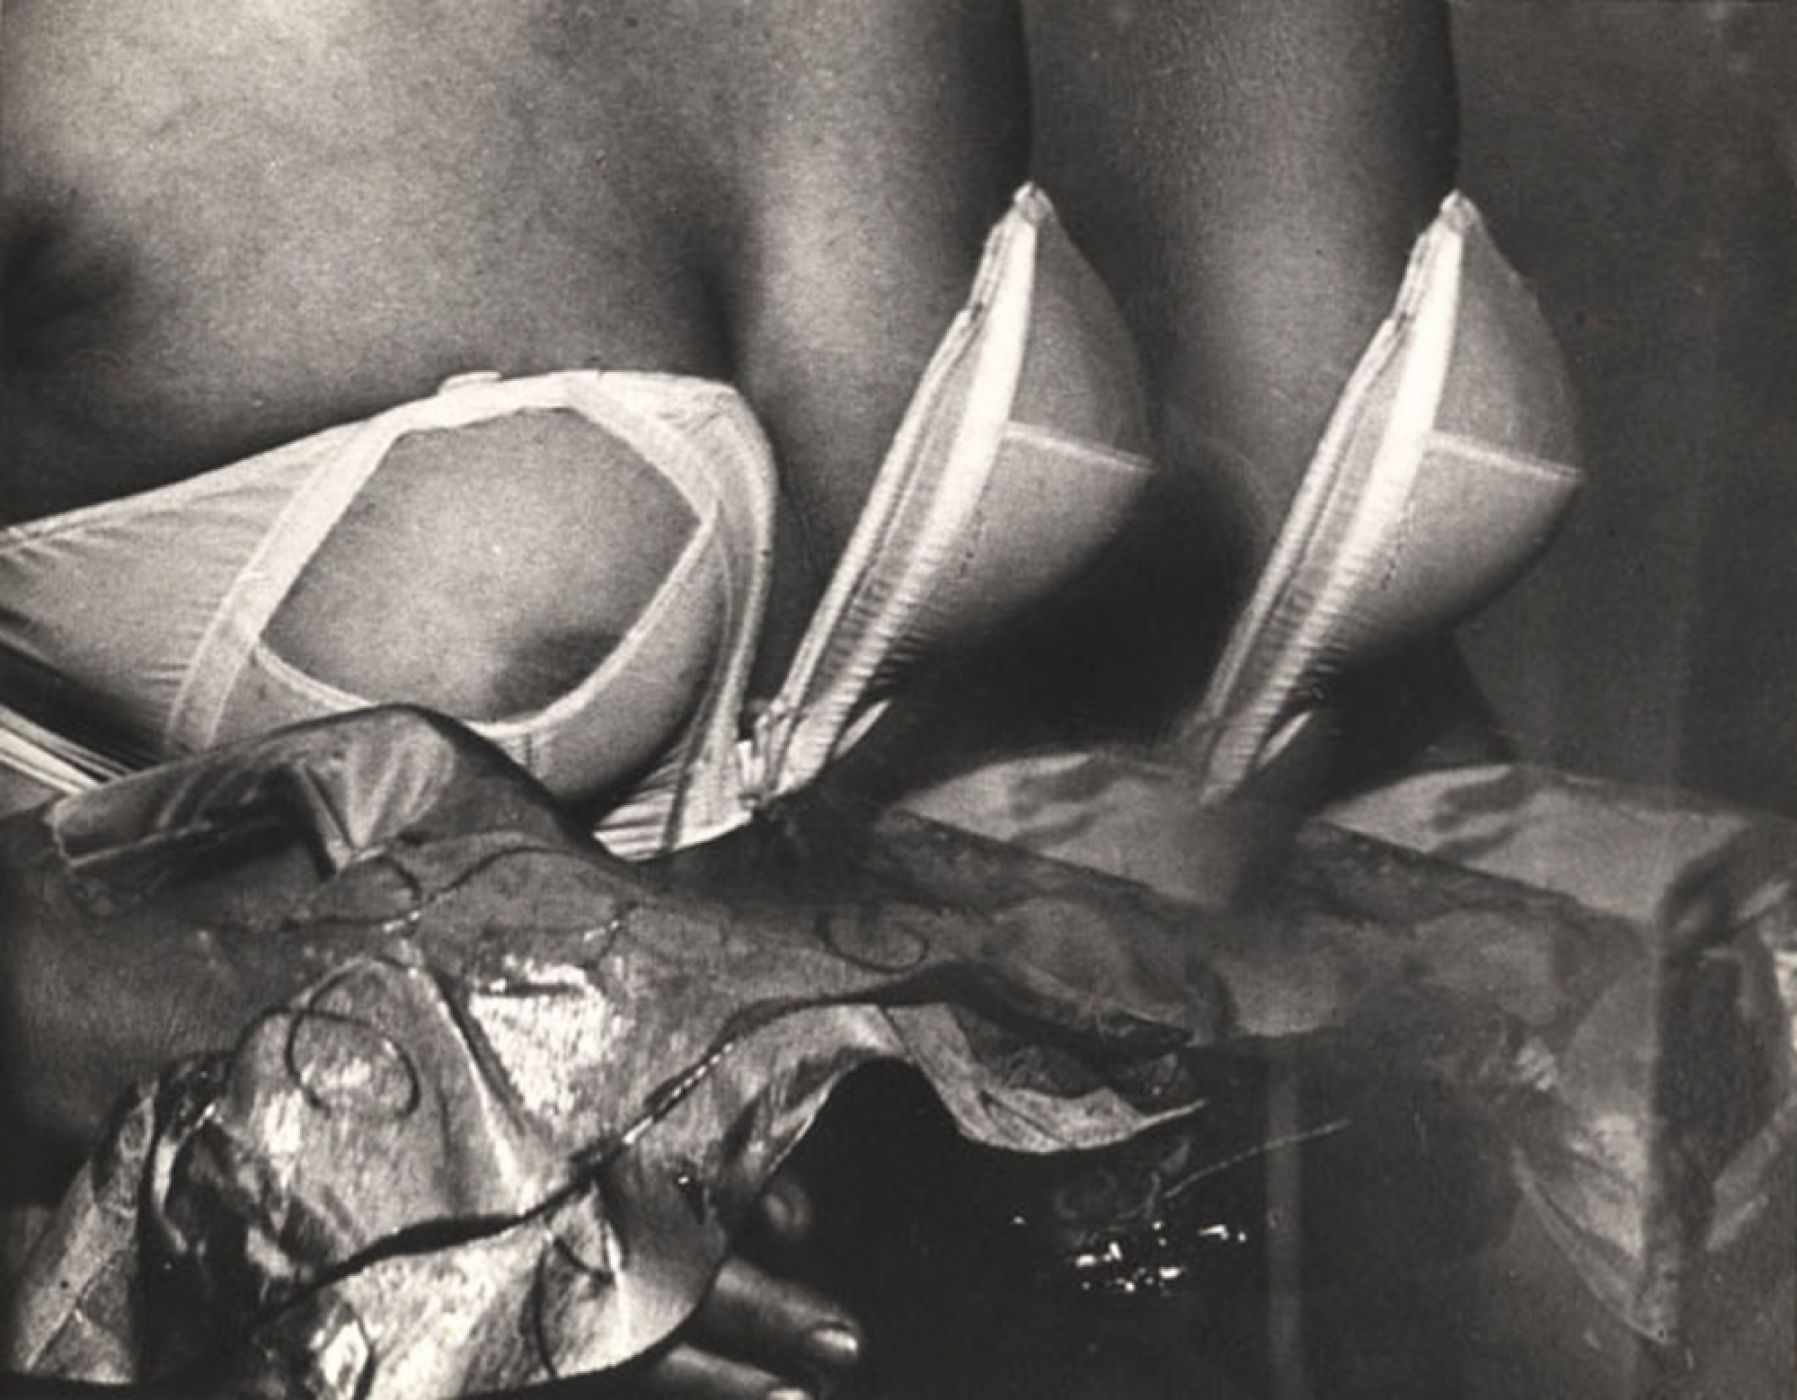 Weegee, “Woman with three breasts (from “Naked Hollywood” Series)”, 1950 ca.